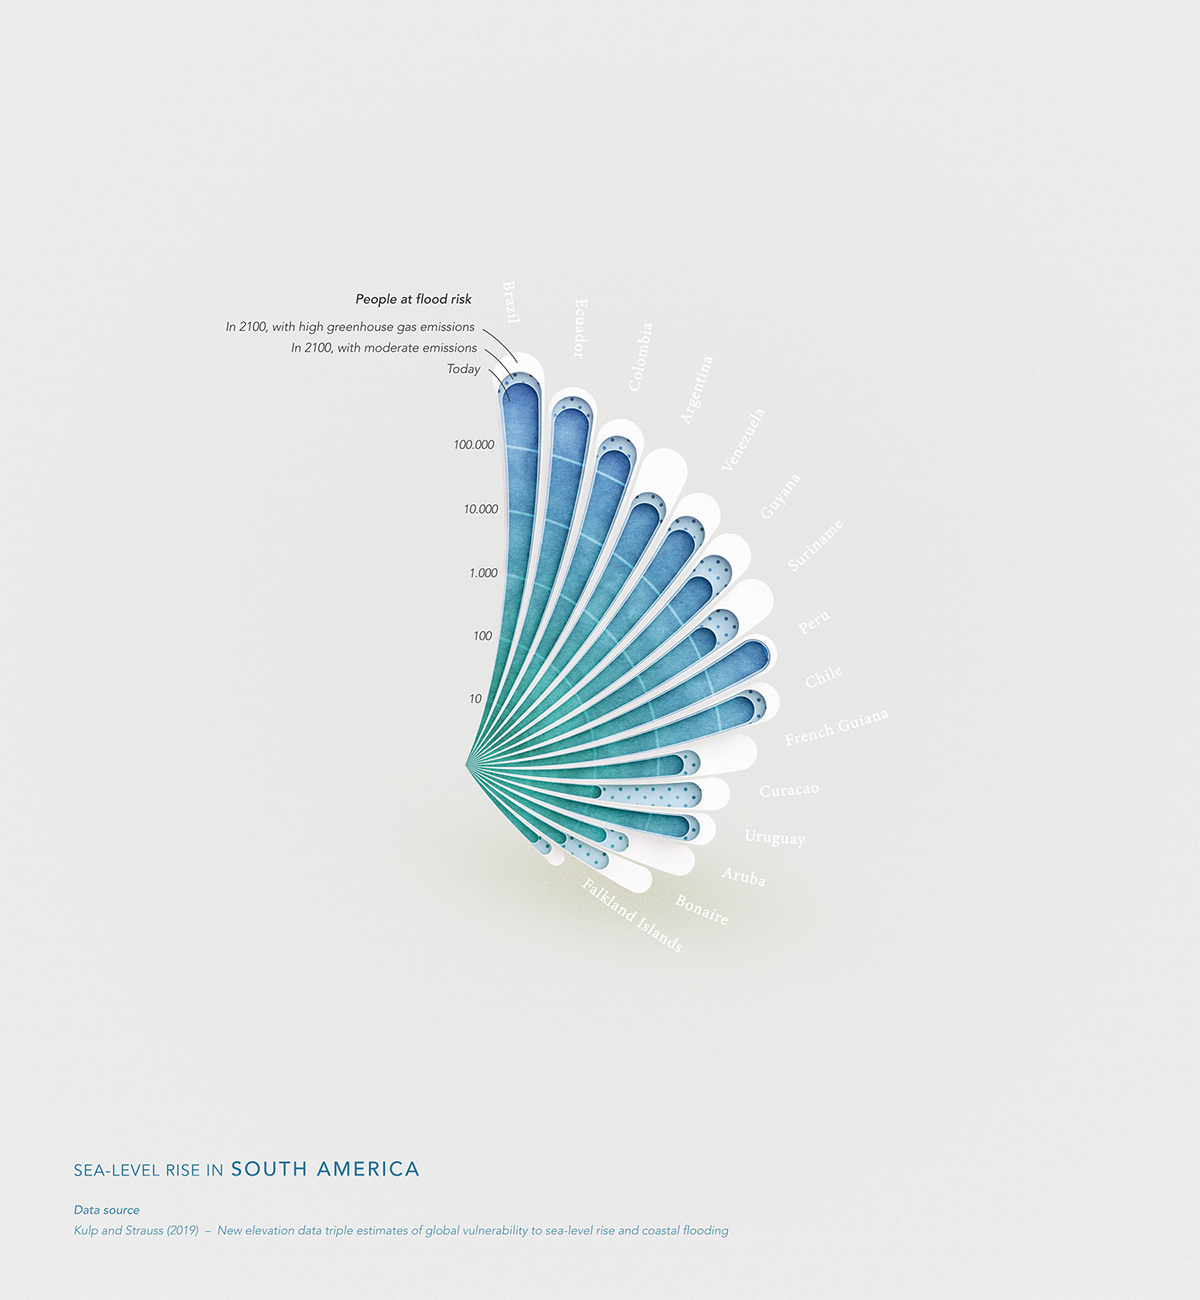 Infographic data visualization (or dataviz) on sea level rise and people at flood risk in S. America